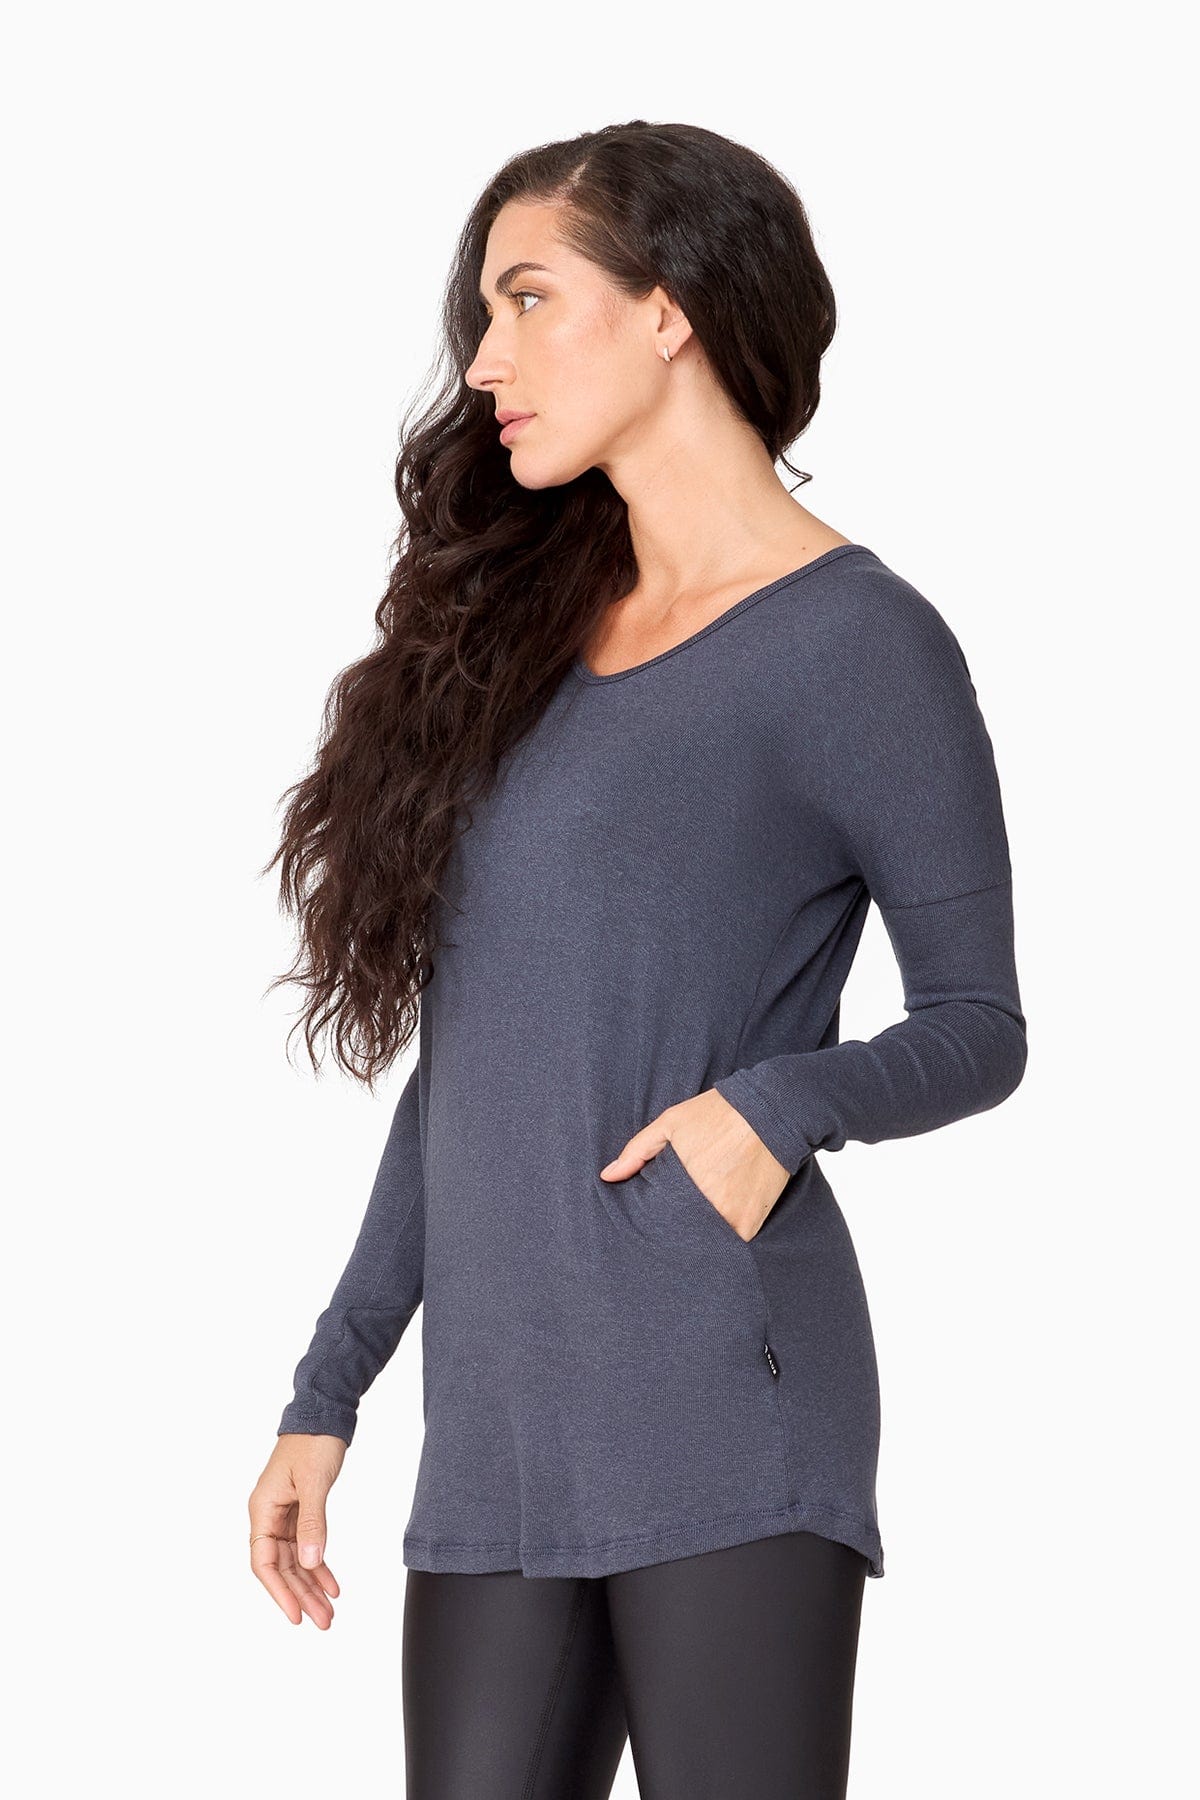 The side of a woman wearing a blue long sleeve sweater with pocket.